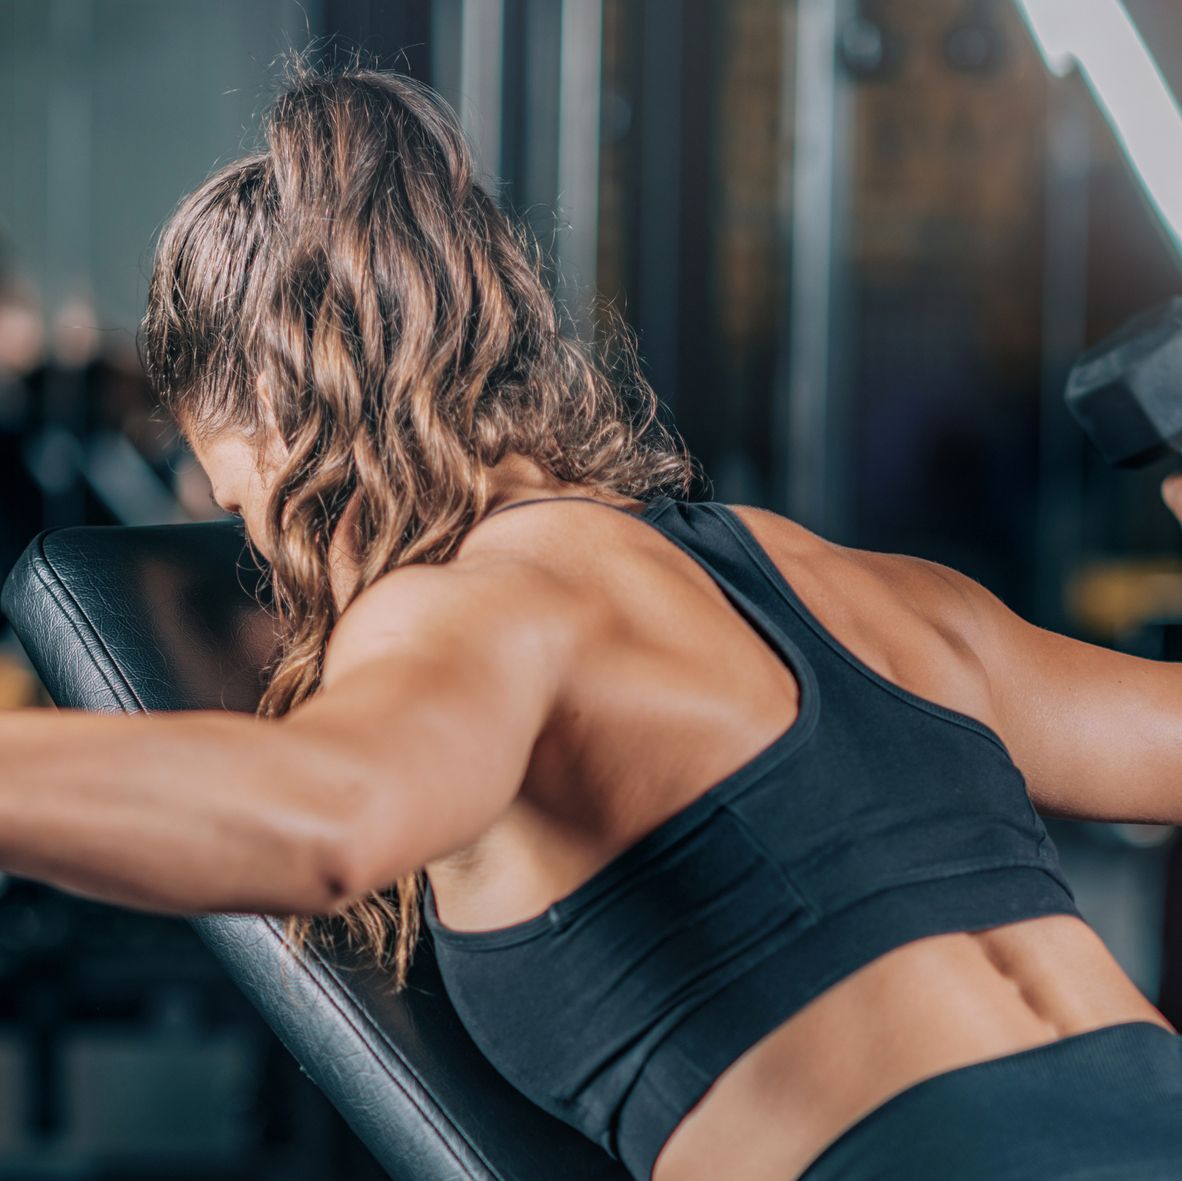 8 Best Rear Delt Exercises For Toned Shoulders, According To A Trainer